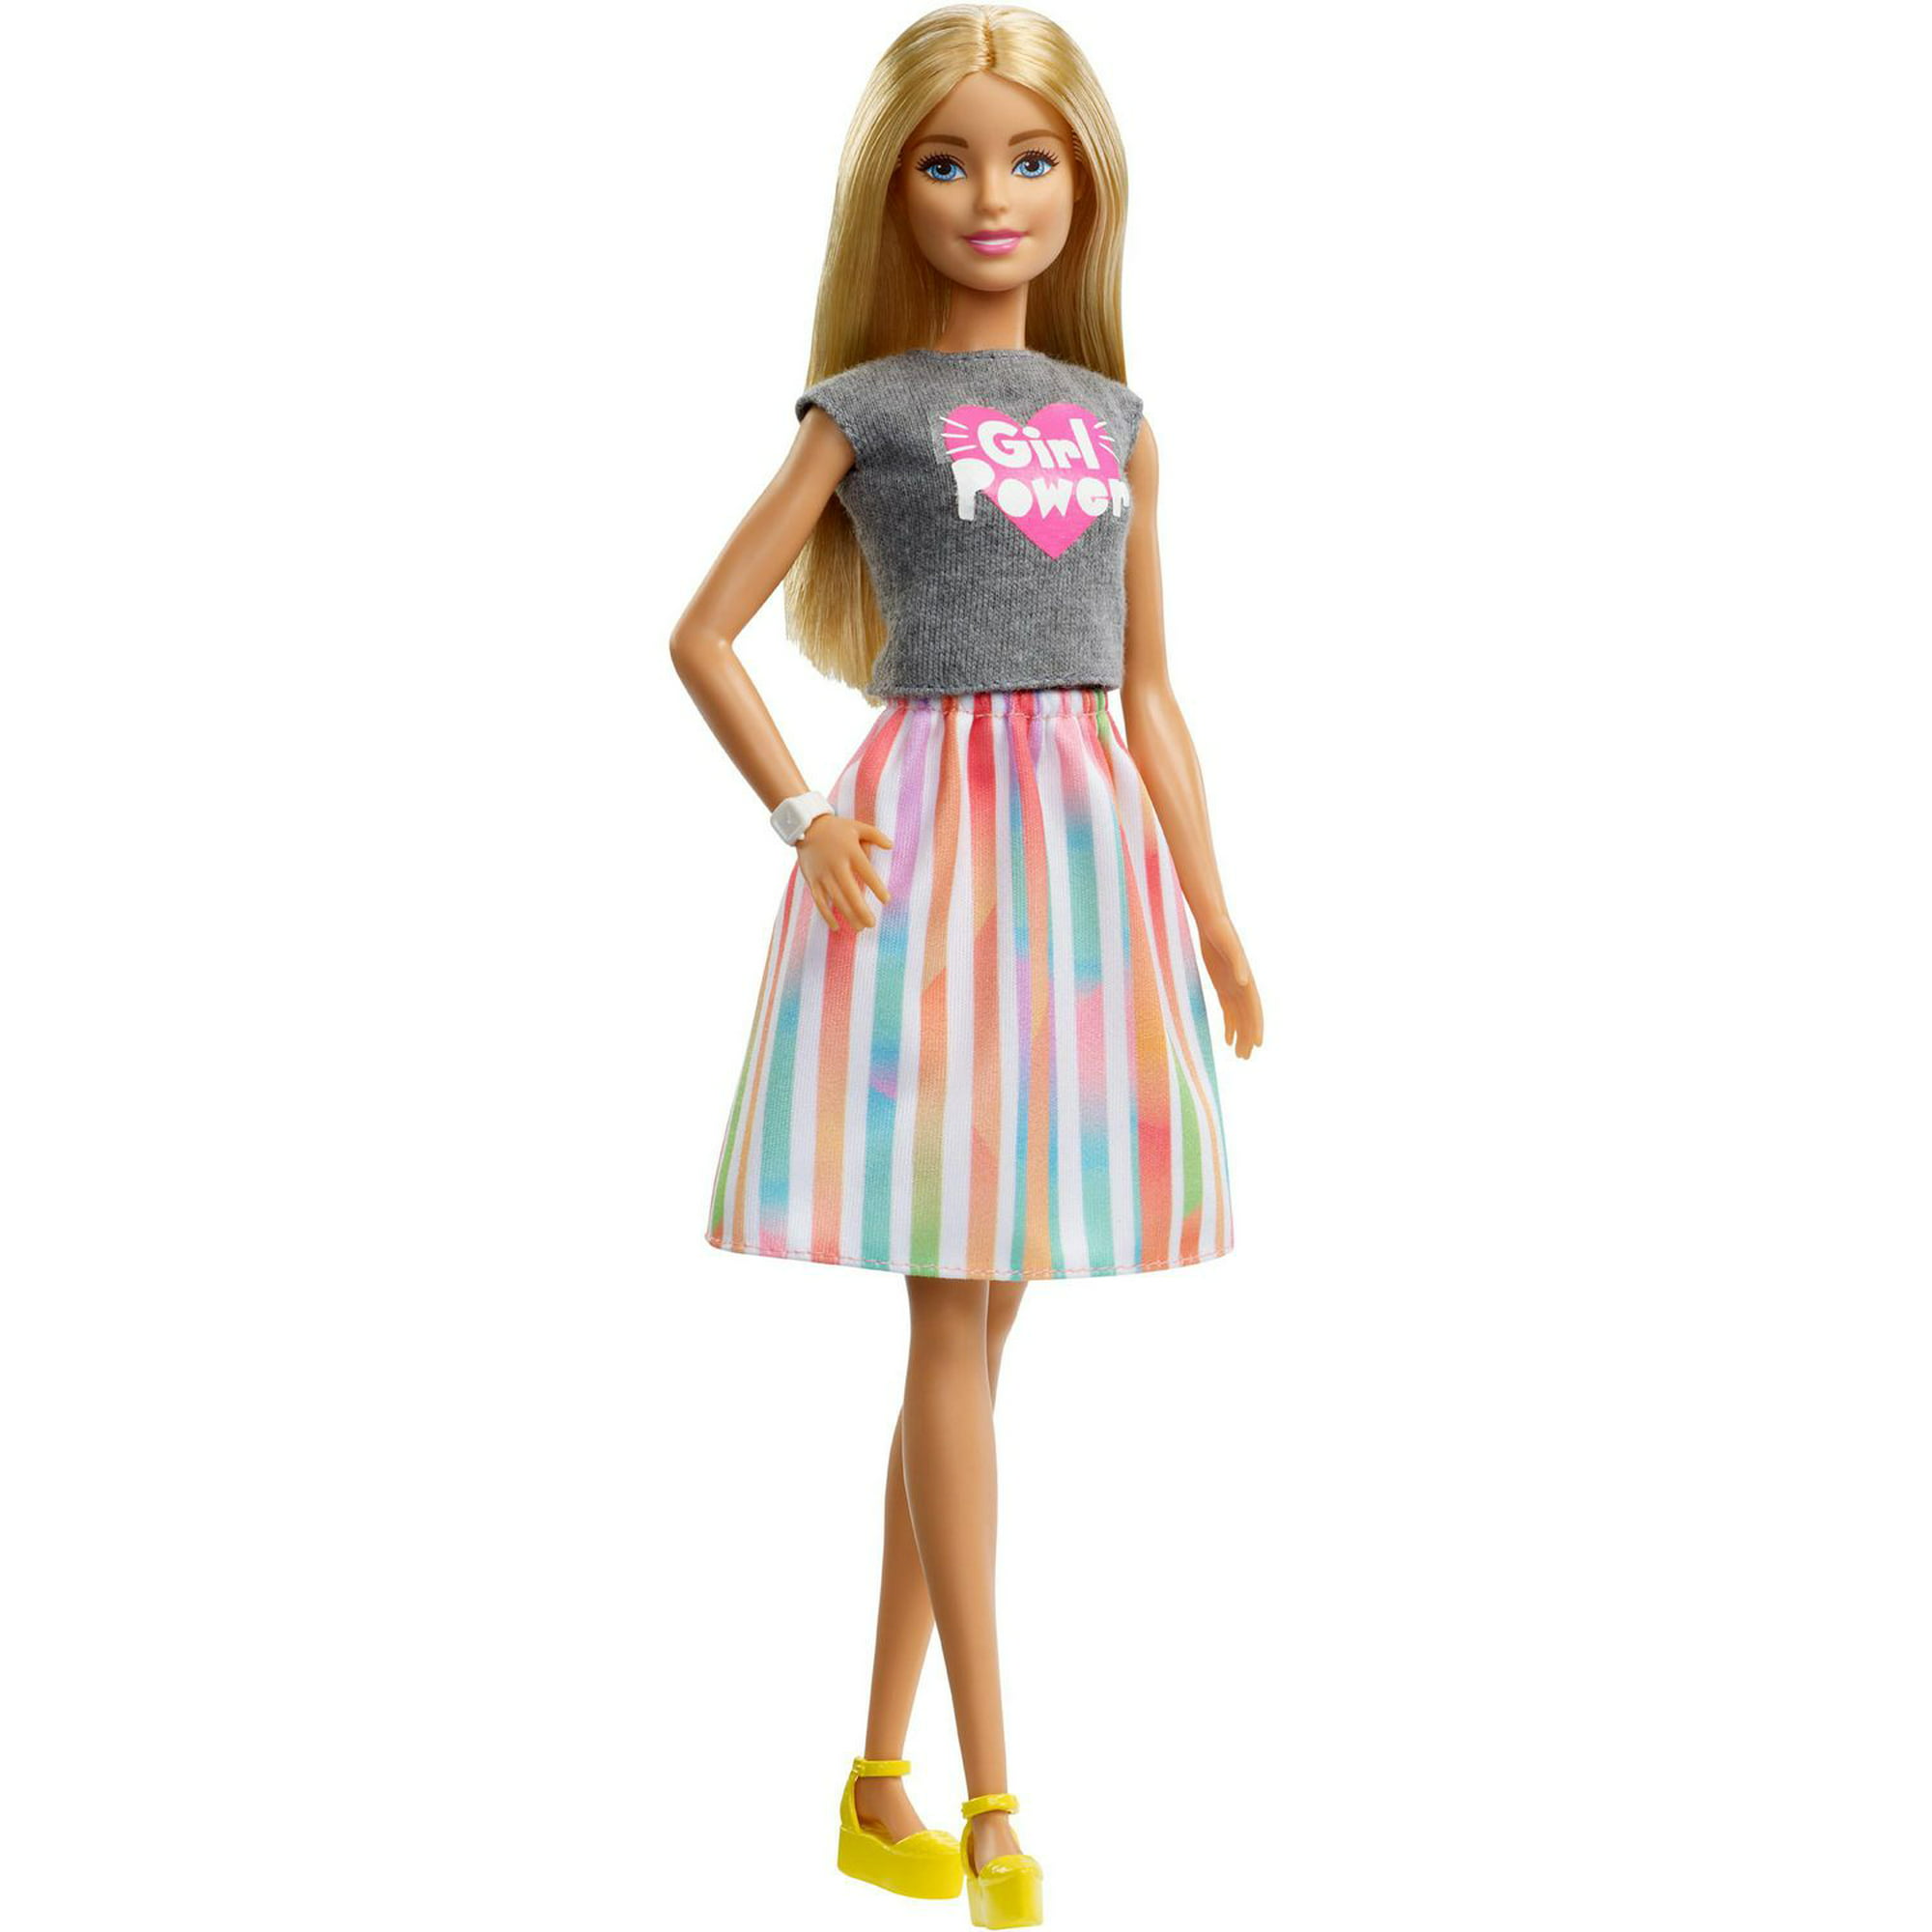 Walmart.ca Clearance Sale: Barbie Digital Dress Doll $20 (Reg. $40) + FREE  Shipping - Canadian Freebies, Coupons, Deals, Bargains, Flyers, Contests  Canada Canadian Freebies, Coupons, Deals, Bargains, Flyers, Contests Canada